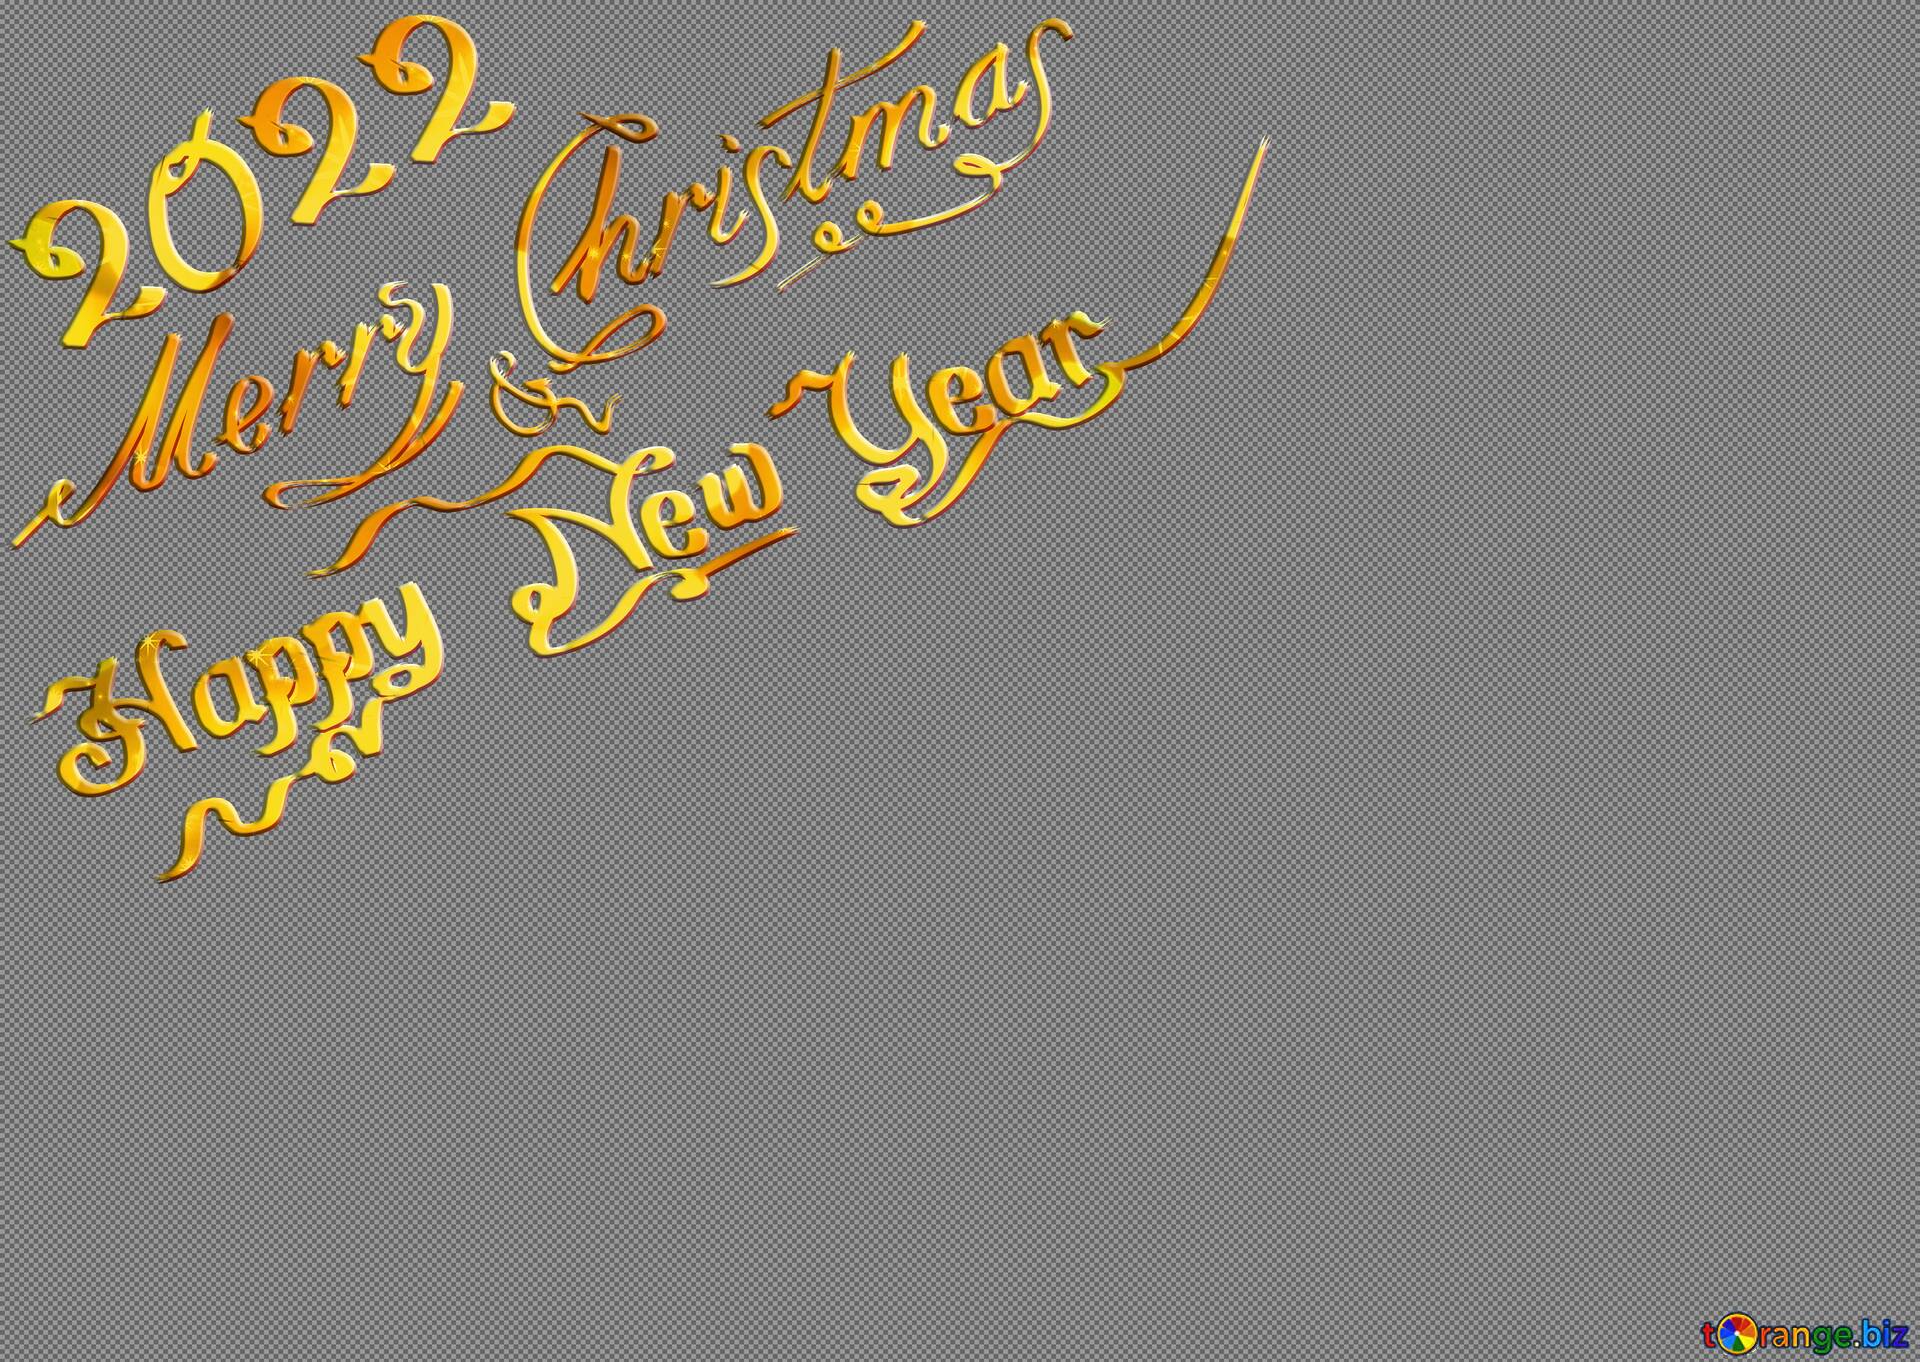 Graphic backgrounds image happy new year 2022 and merry christmas